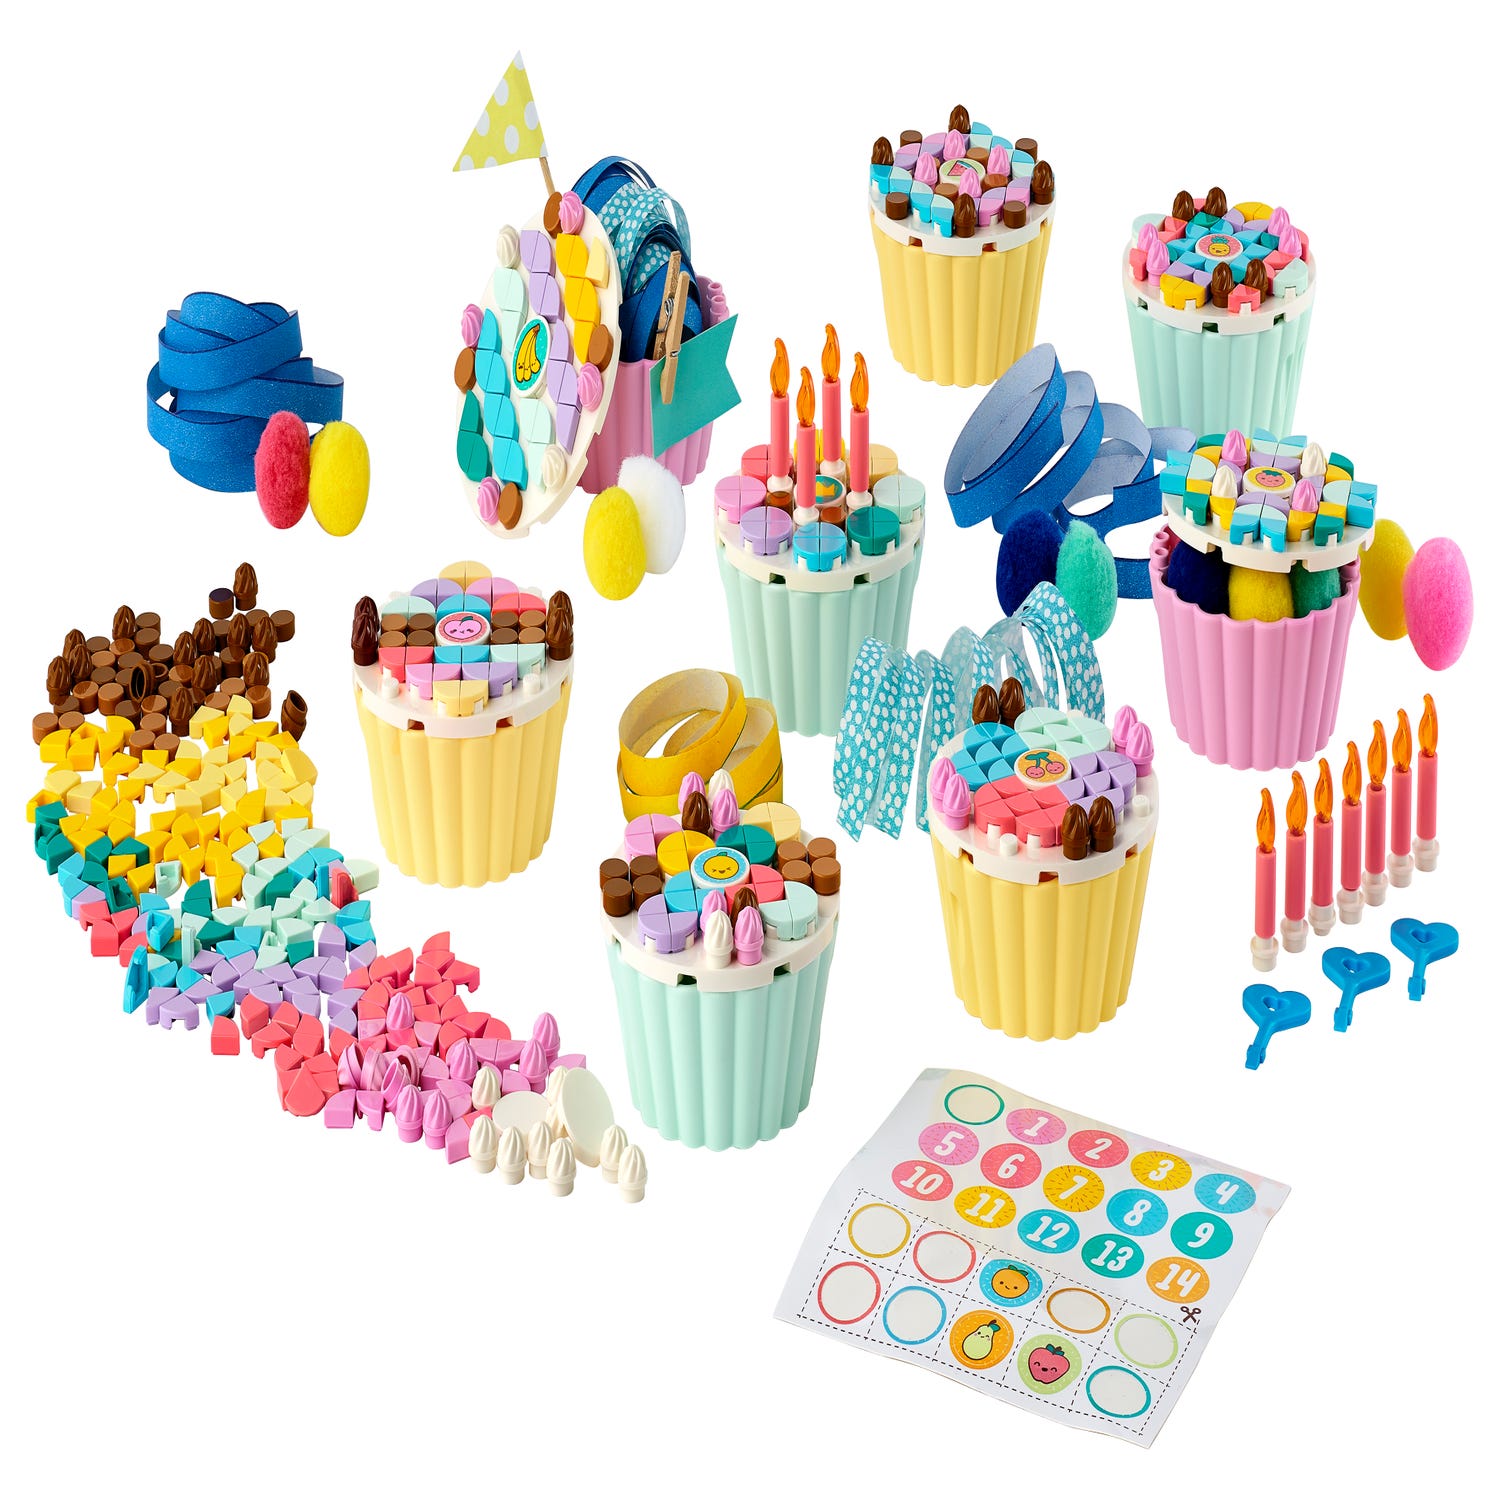 Cupcake Making Arts and Crafts Kit for Kids, Birthday Gift for